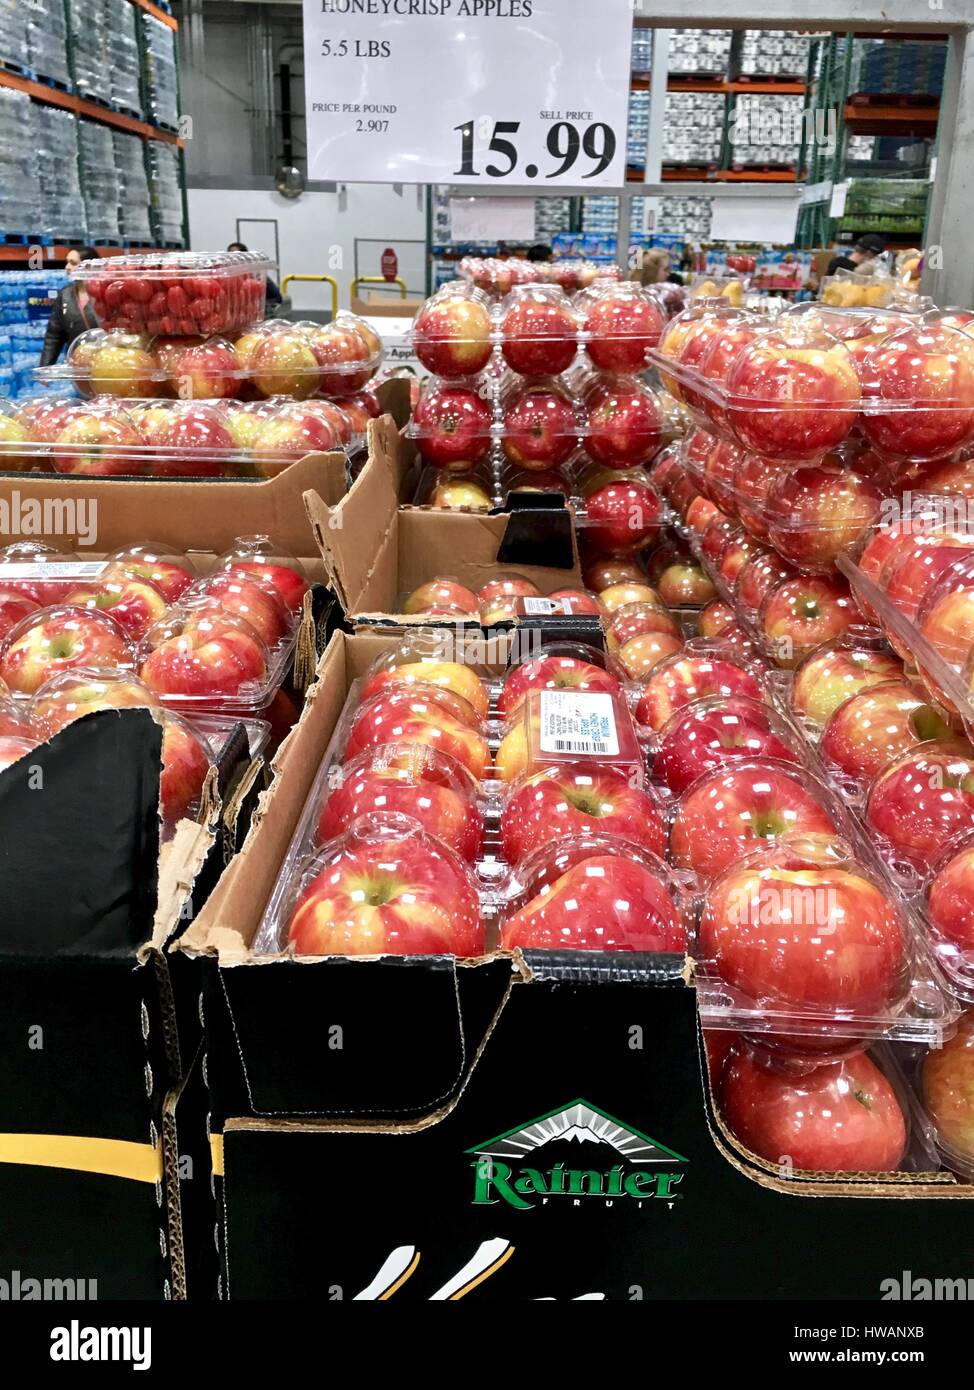 Packaged apples at Costco Stock Photo